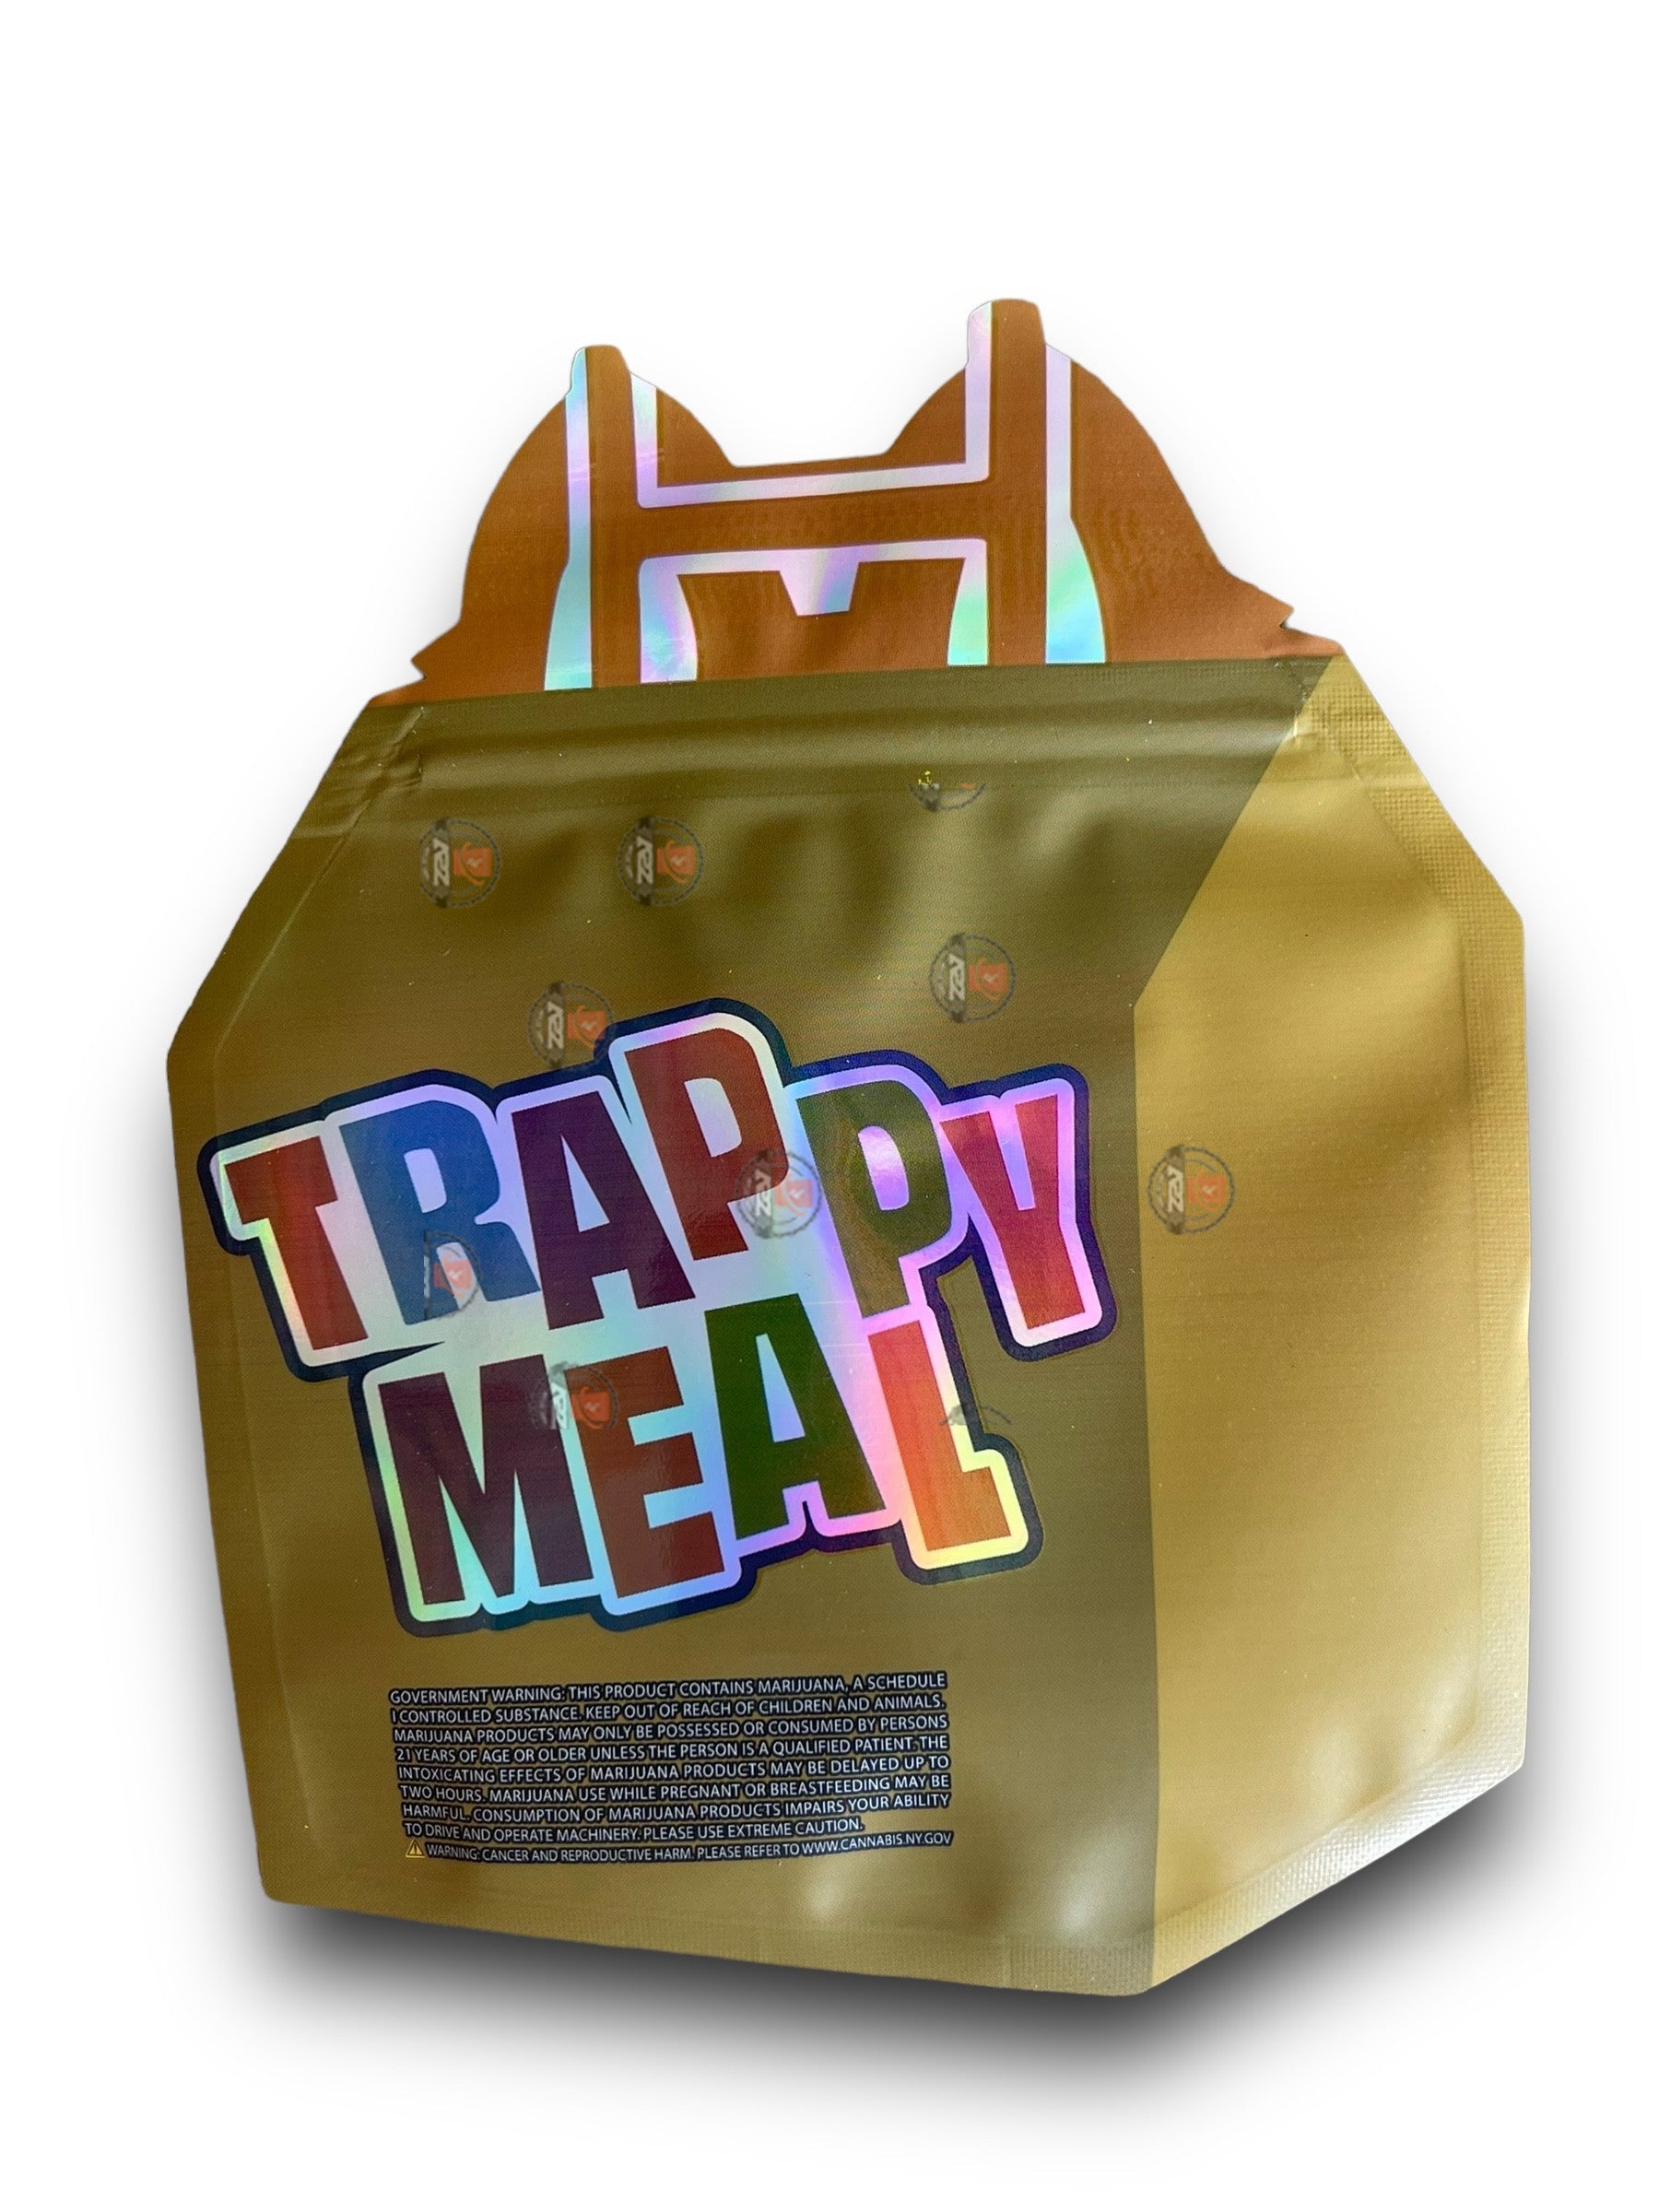 Trappy Meal 3.5G Mylar Bag Gold